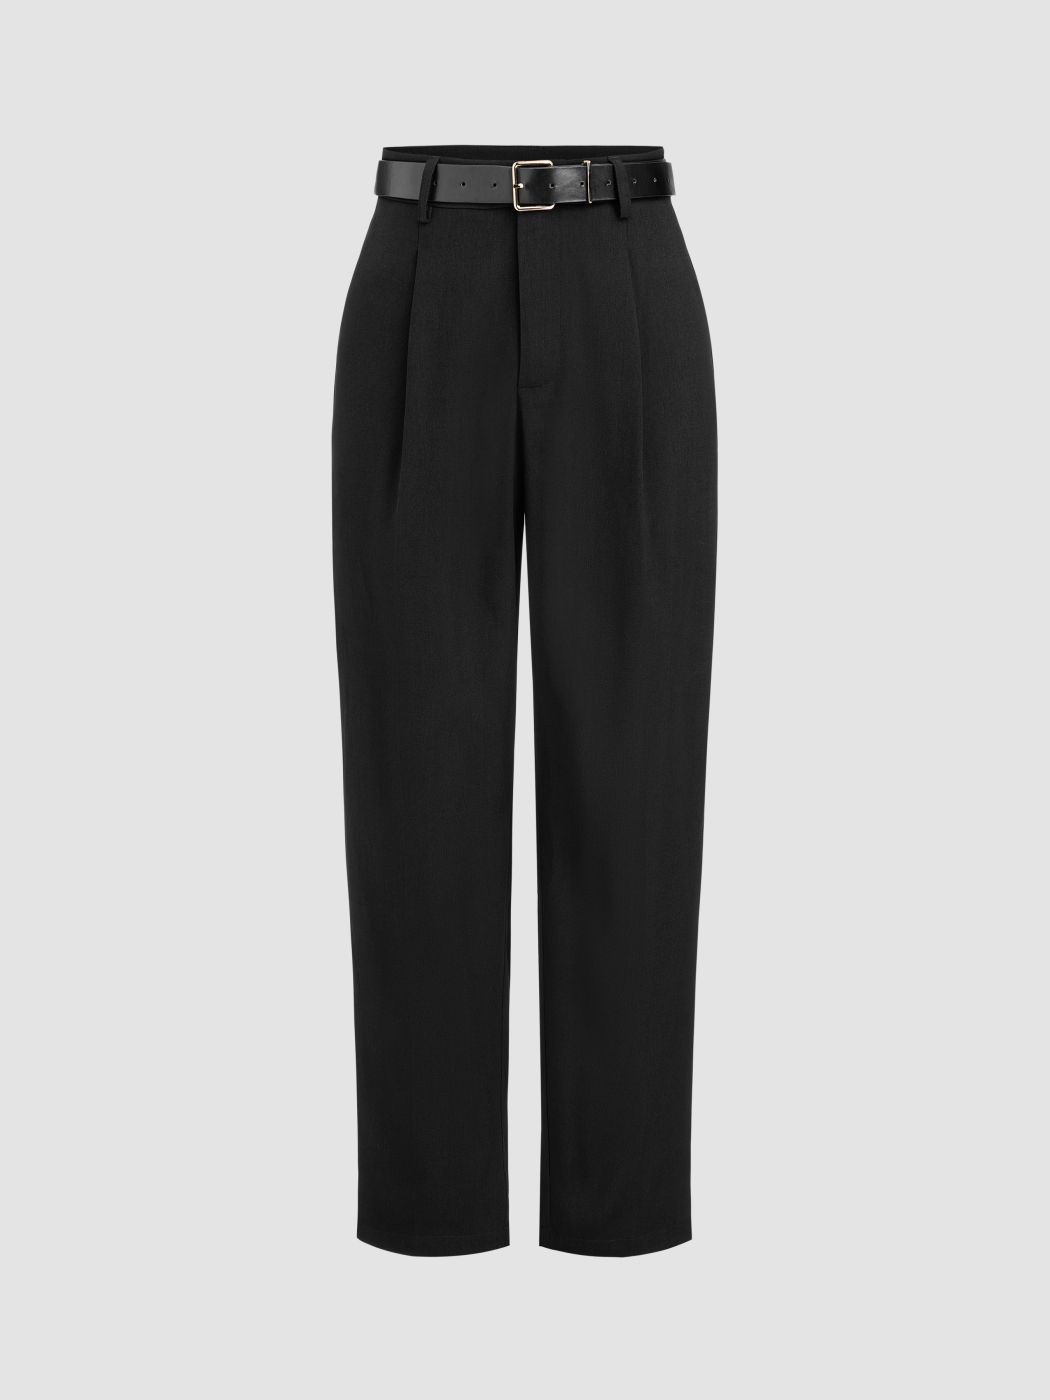 High Waist Solid Tapered Trousers With Belt For Daily Casual Coffee ...